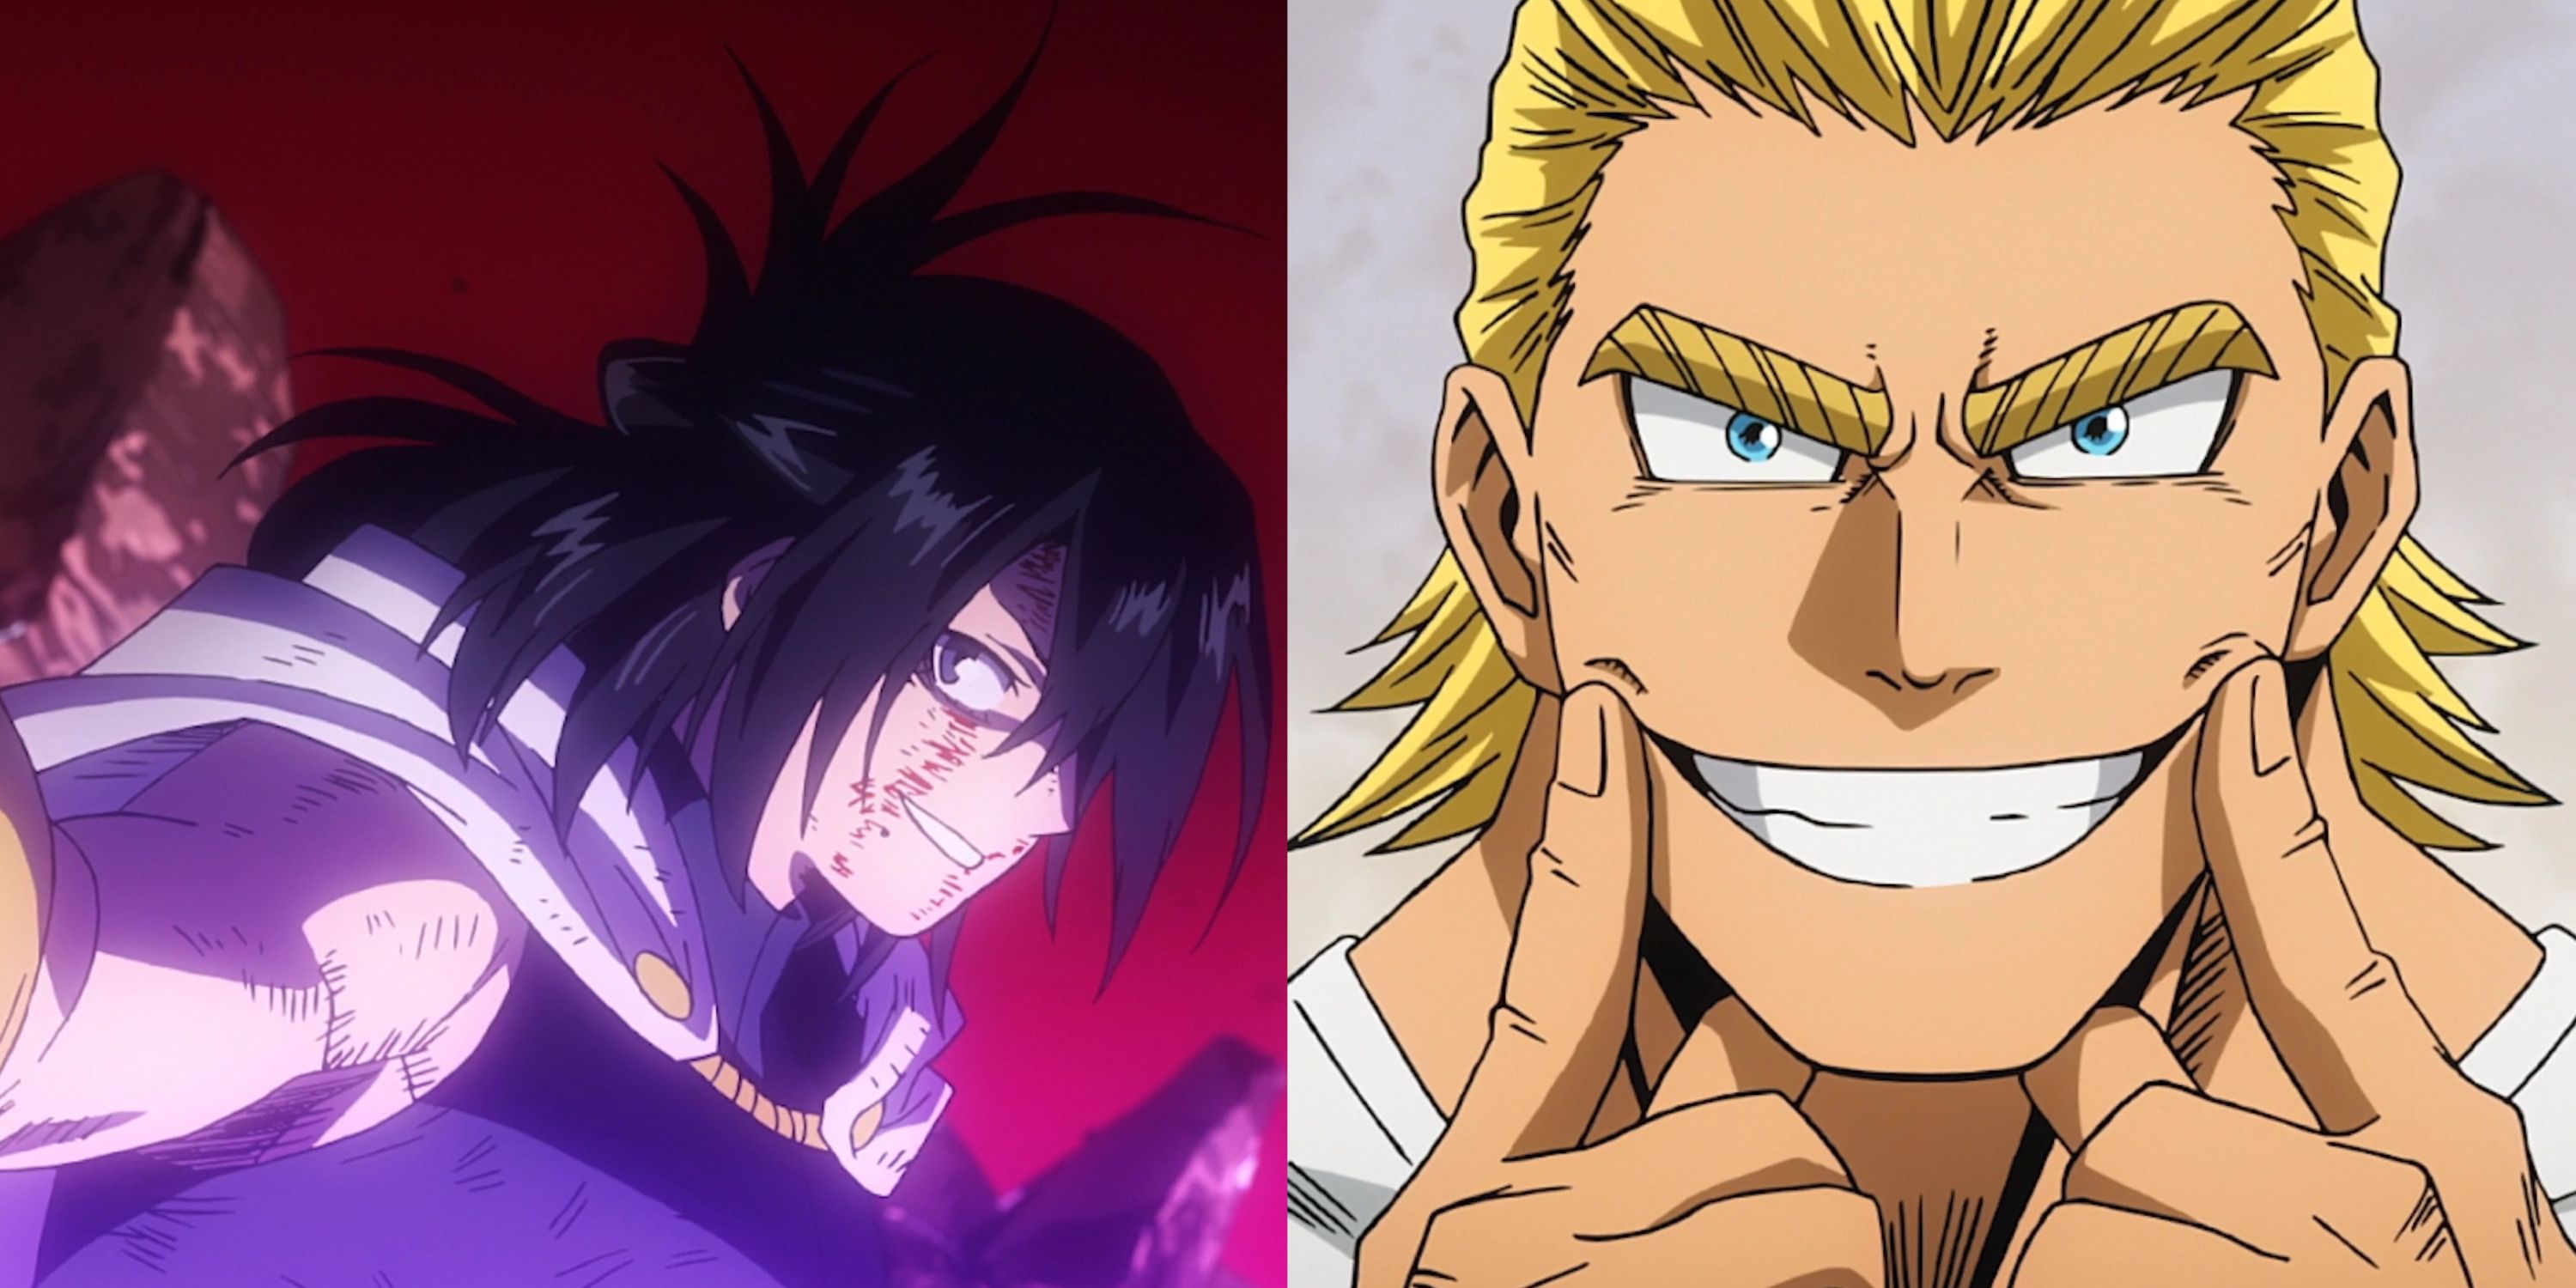 Collage of Nana Shimura entrusting Toshinori with OFA before her death, Toshinori practicing his All Might grin